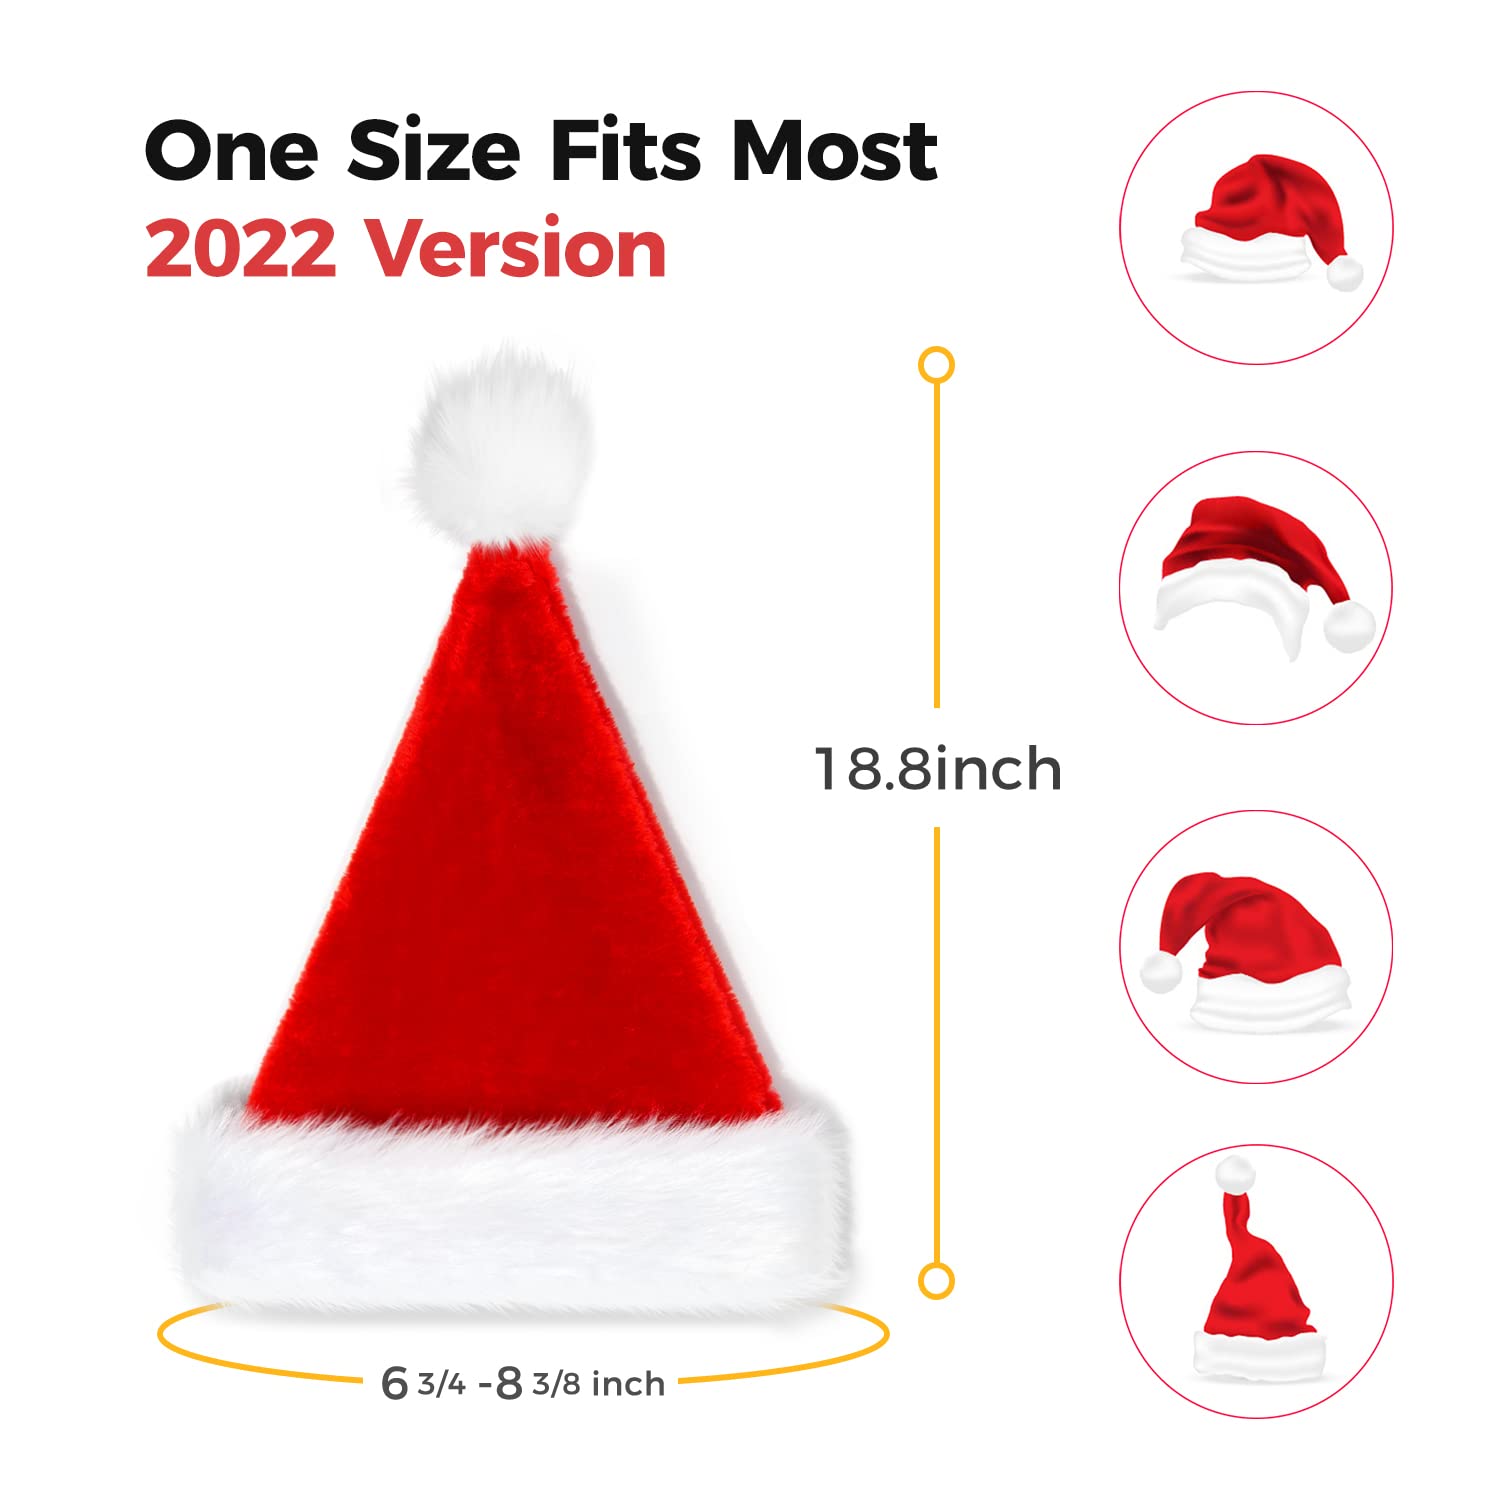 eCraftIndia Red and White Velvet Classic Fur Merry Christmas Hats, Santa Claus Caps for kids and Adults - XMAS Caps, Santa Hats for Christmas, New Year, Festive Holiday Party Celebration (Set of 3) 7